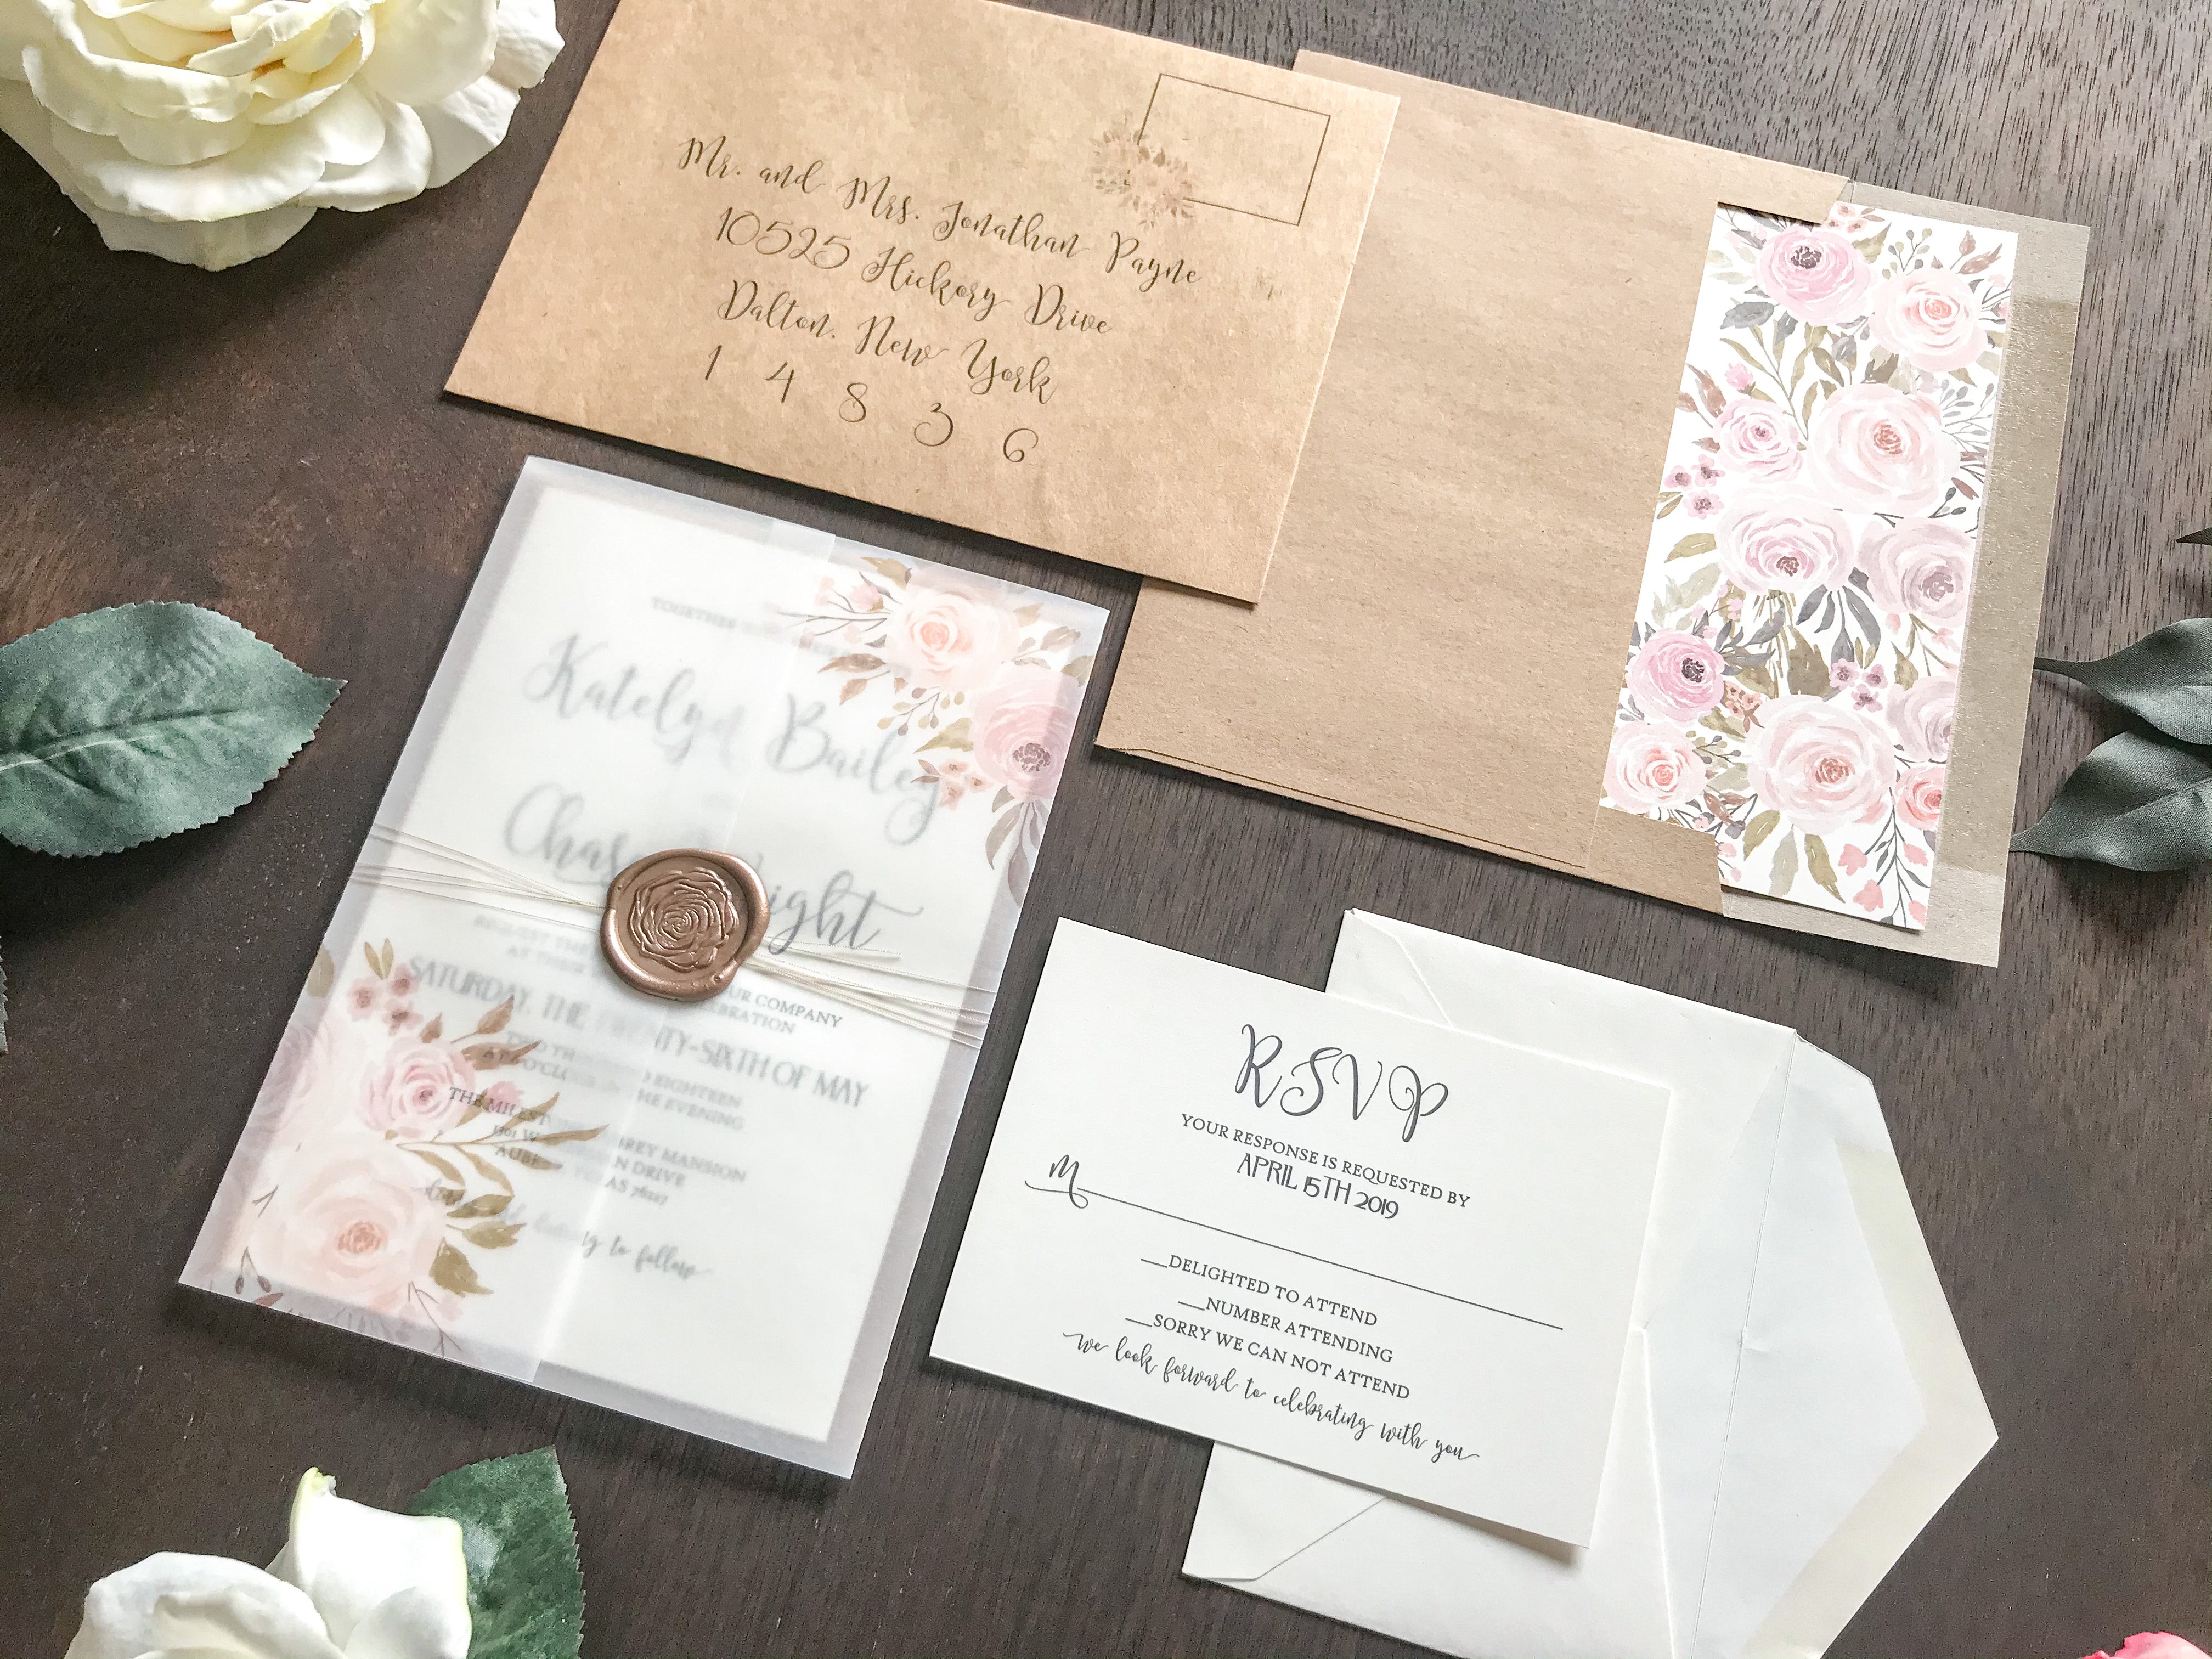 Blush Pink and Navy Blue Wedding Invitation with Vellum and Wax Seal –  Creative Custom Prints by Tabitha